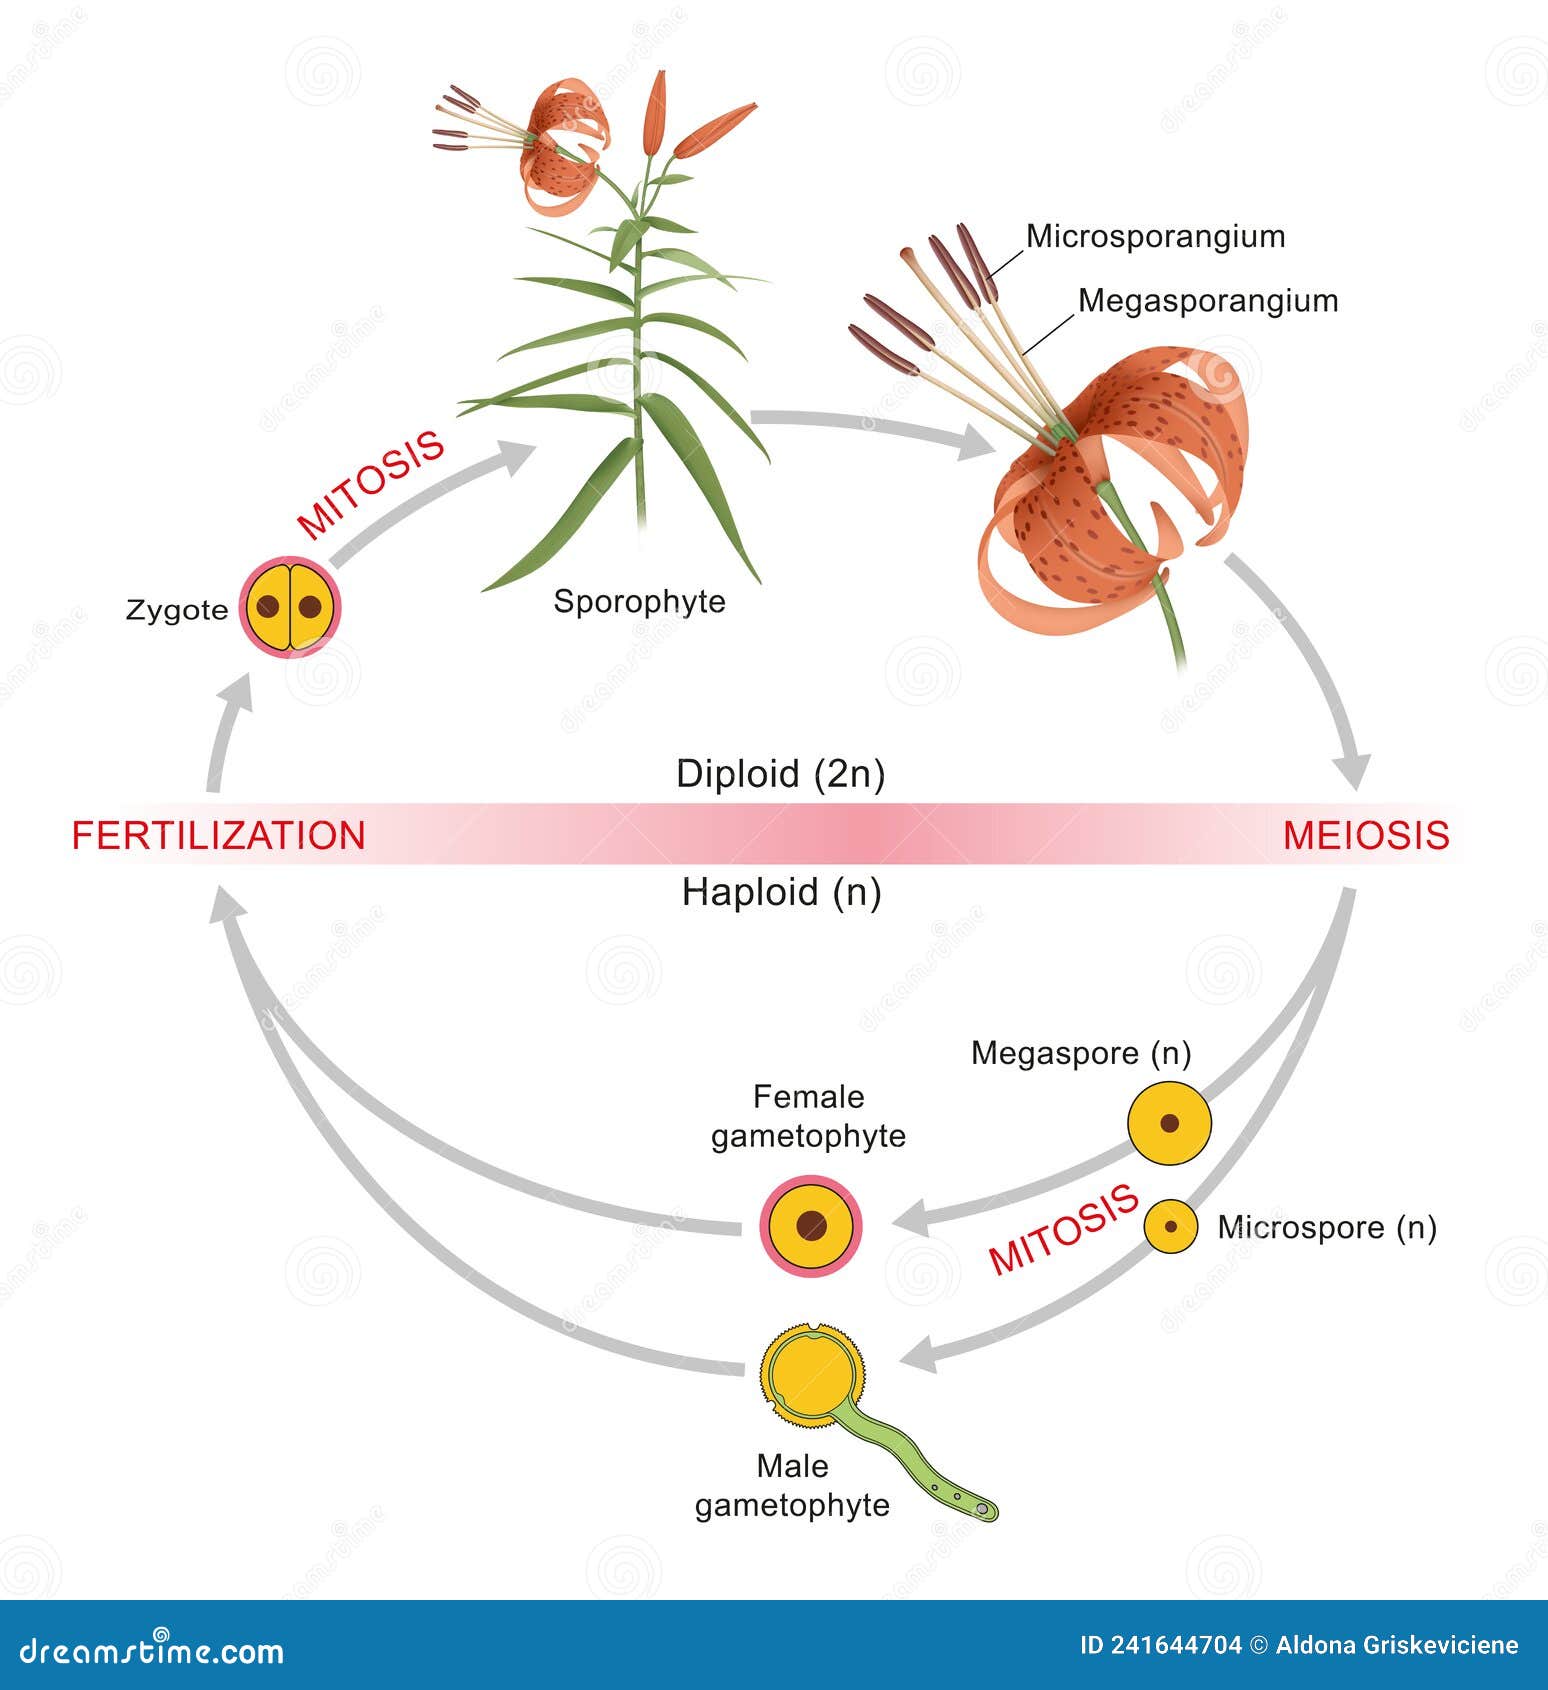 plant life cycle. alternation of generations between a diploid sporophyte and a haploid gametophyte